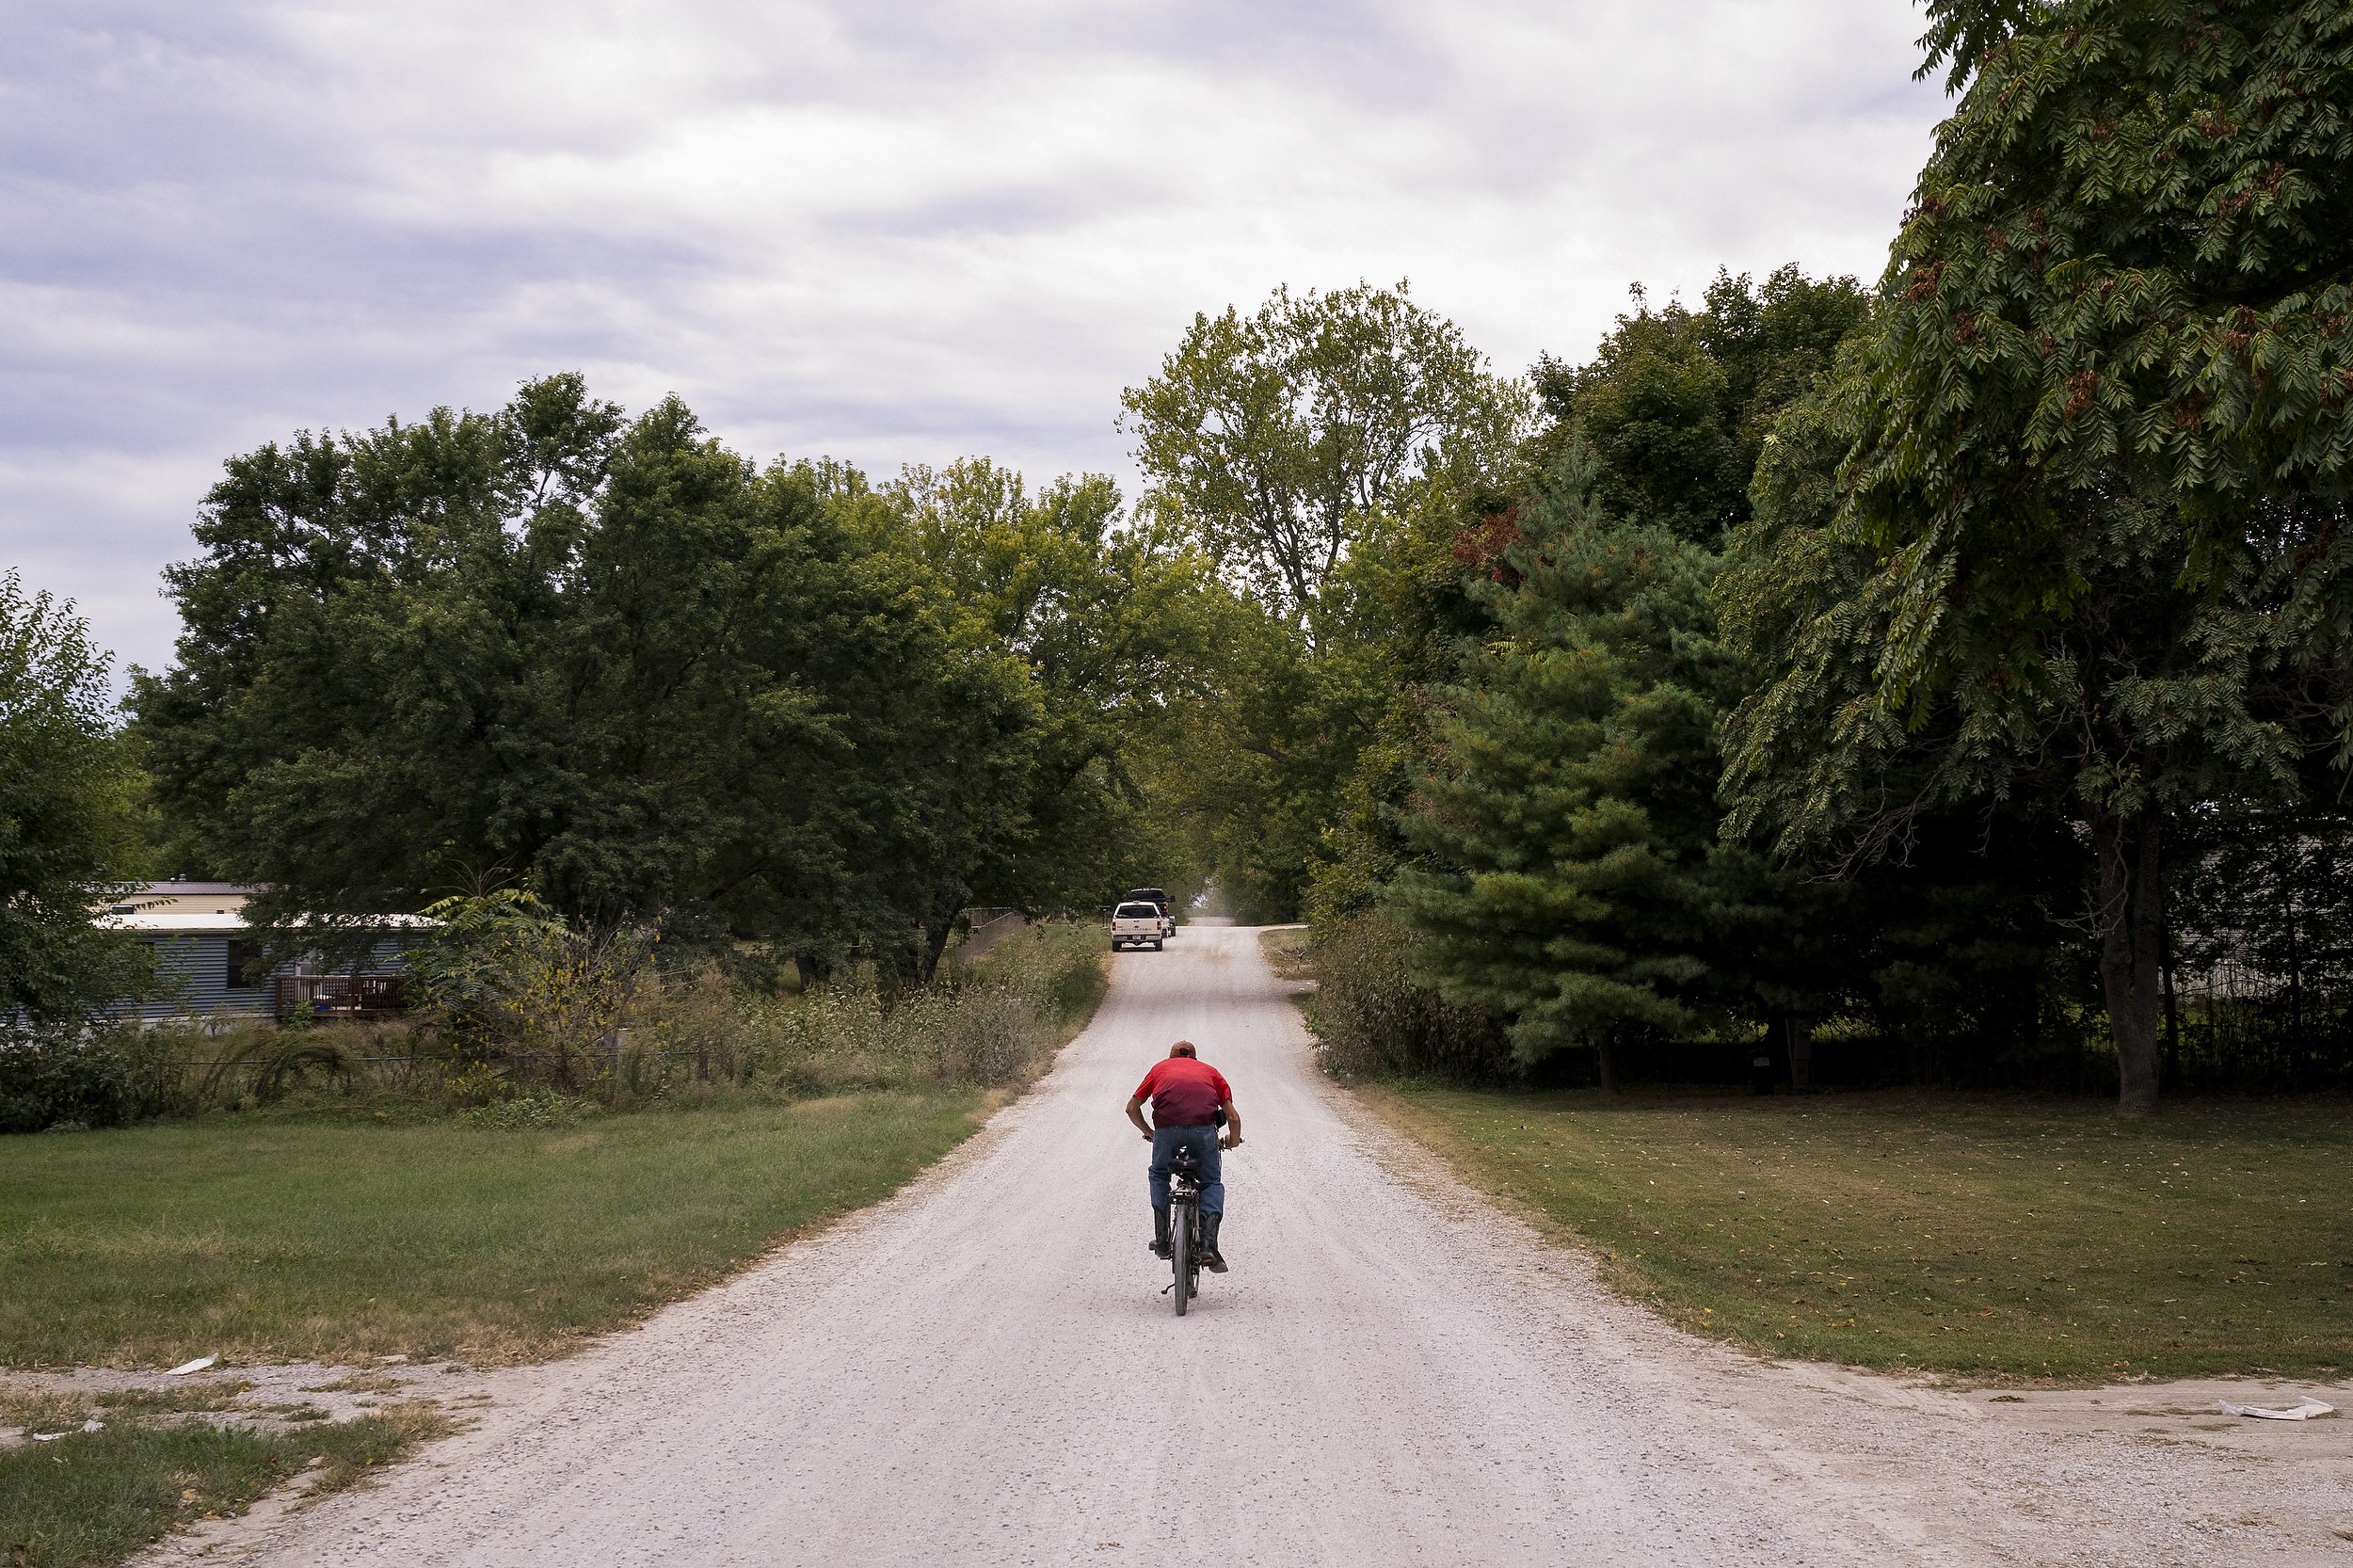  Daryel Franklin Miller, 50, tests out his motor equipped bike after he made adjustments to its carburetor on Thursday, September 22, 2022, in Excelsior Springs, Mo. Miller spent much of his childhood and early adulthood working on motors. 